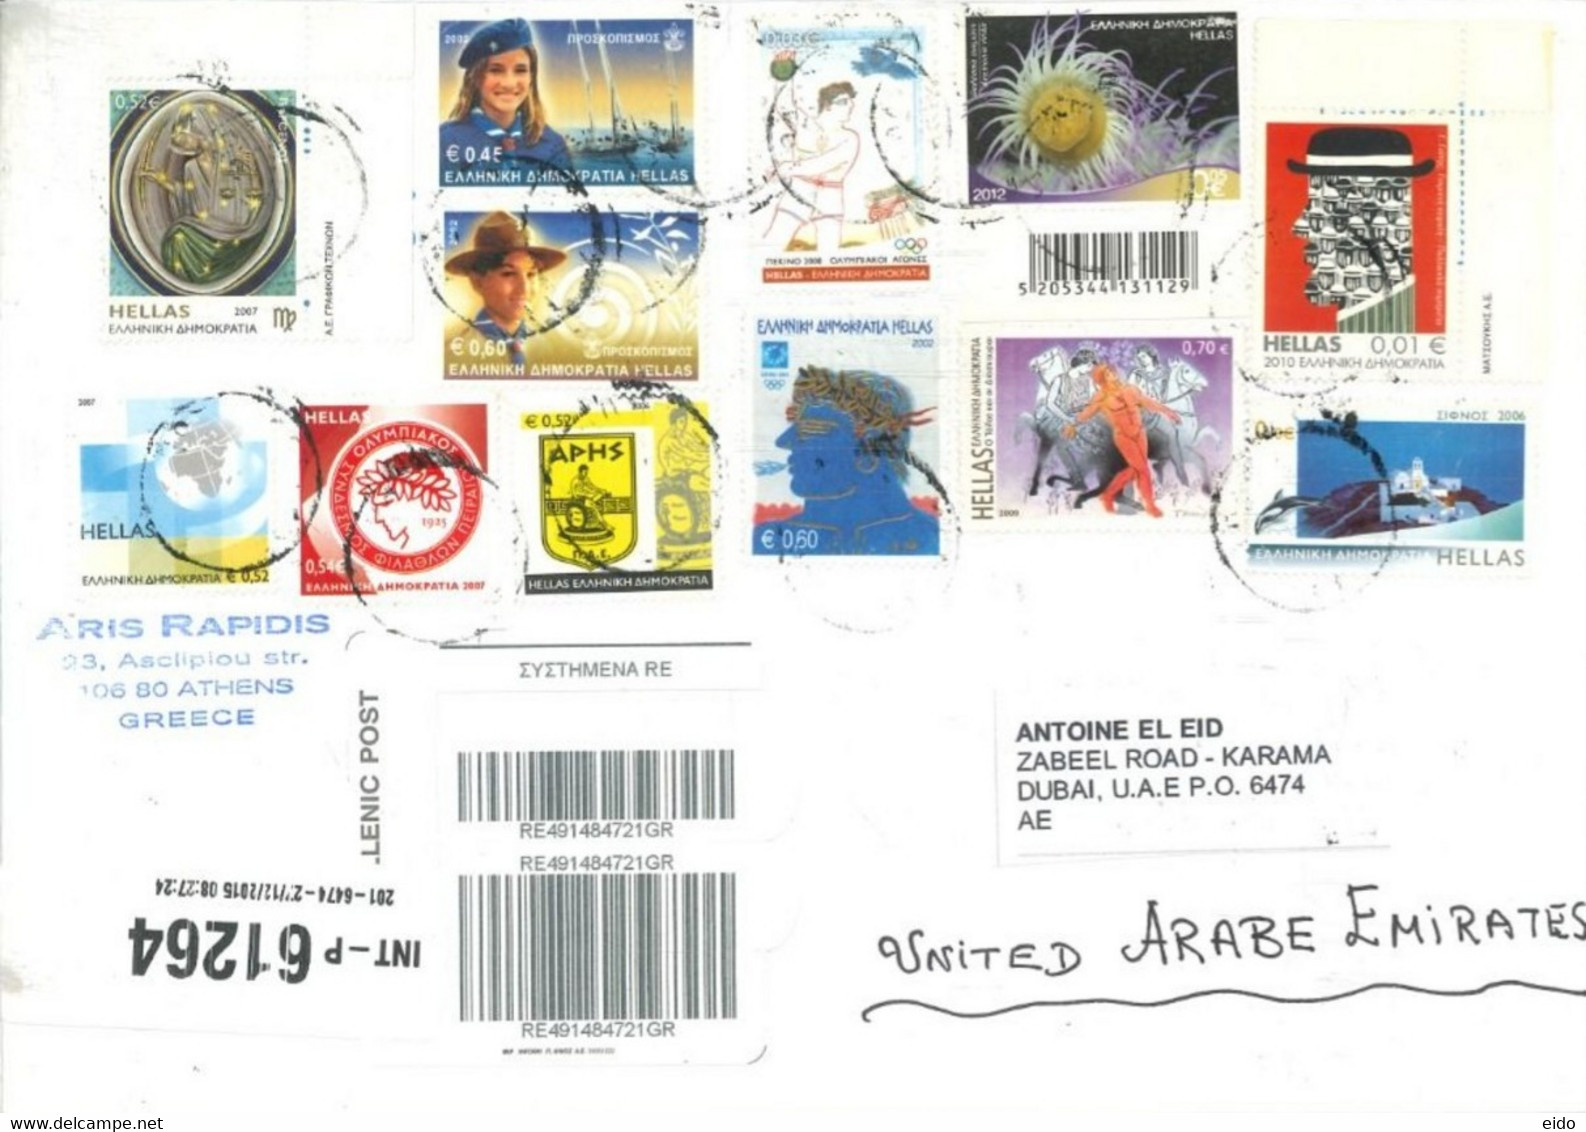 GREECE - 2015 - REGISTERED STAMPS COVER TO DUBAI. - Covers & Documents